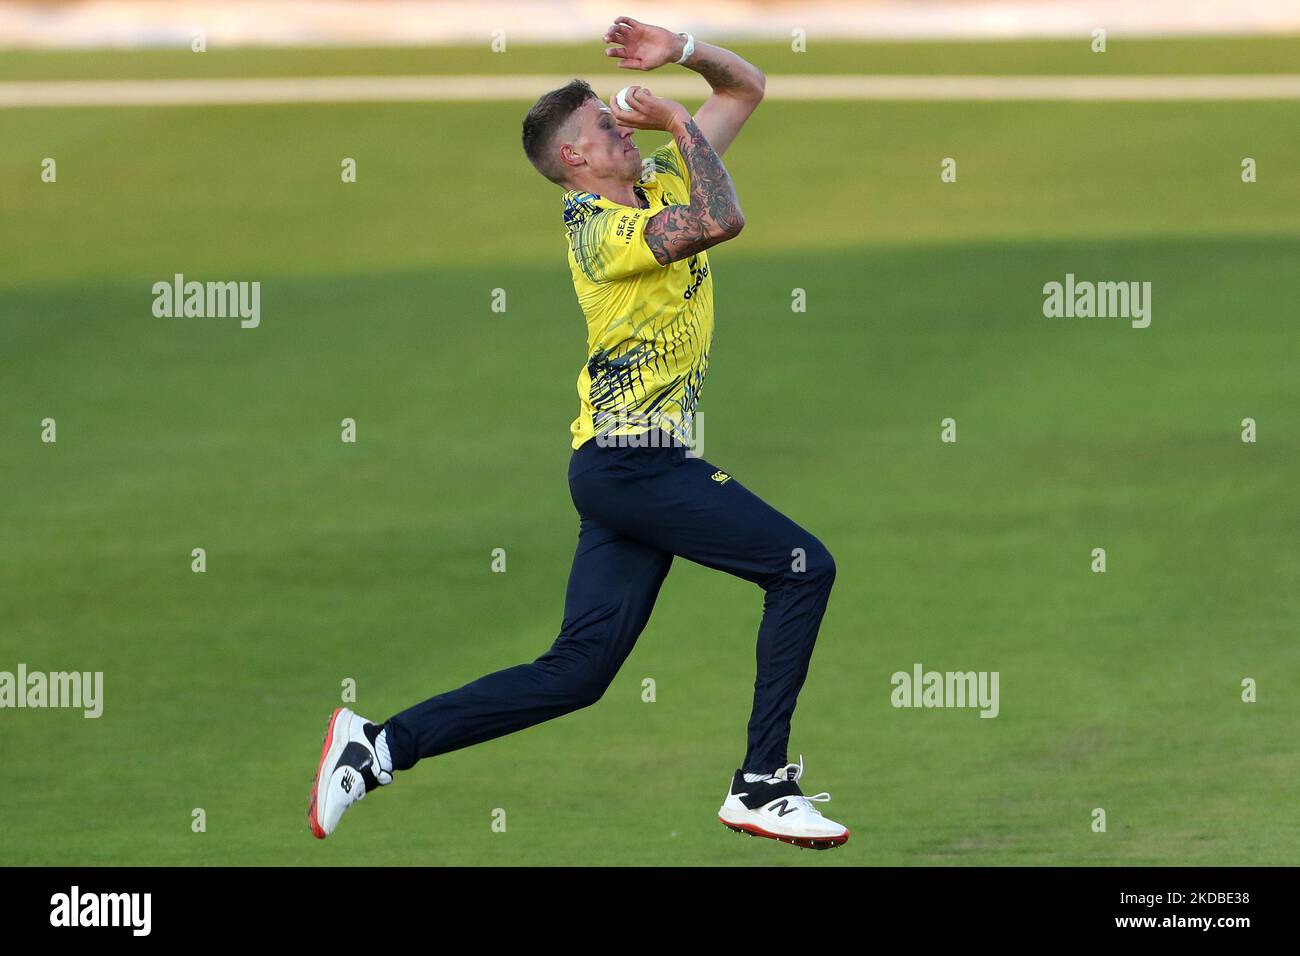 JUN 1st Durham's Brydon Carse bowling during the Vitality T20 Blast match between Durham County Cricket Club and Worcestershire at the Seat Unique Riverside, Chester le Street on Wednesday 1st June 2022. (Photo by Mark Fletcher /MI News/NurPhoto) Stock Photo